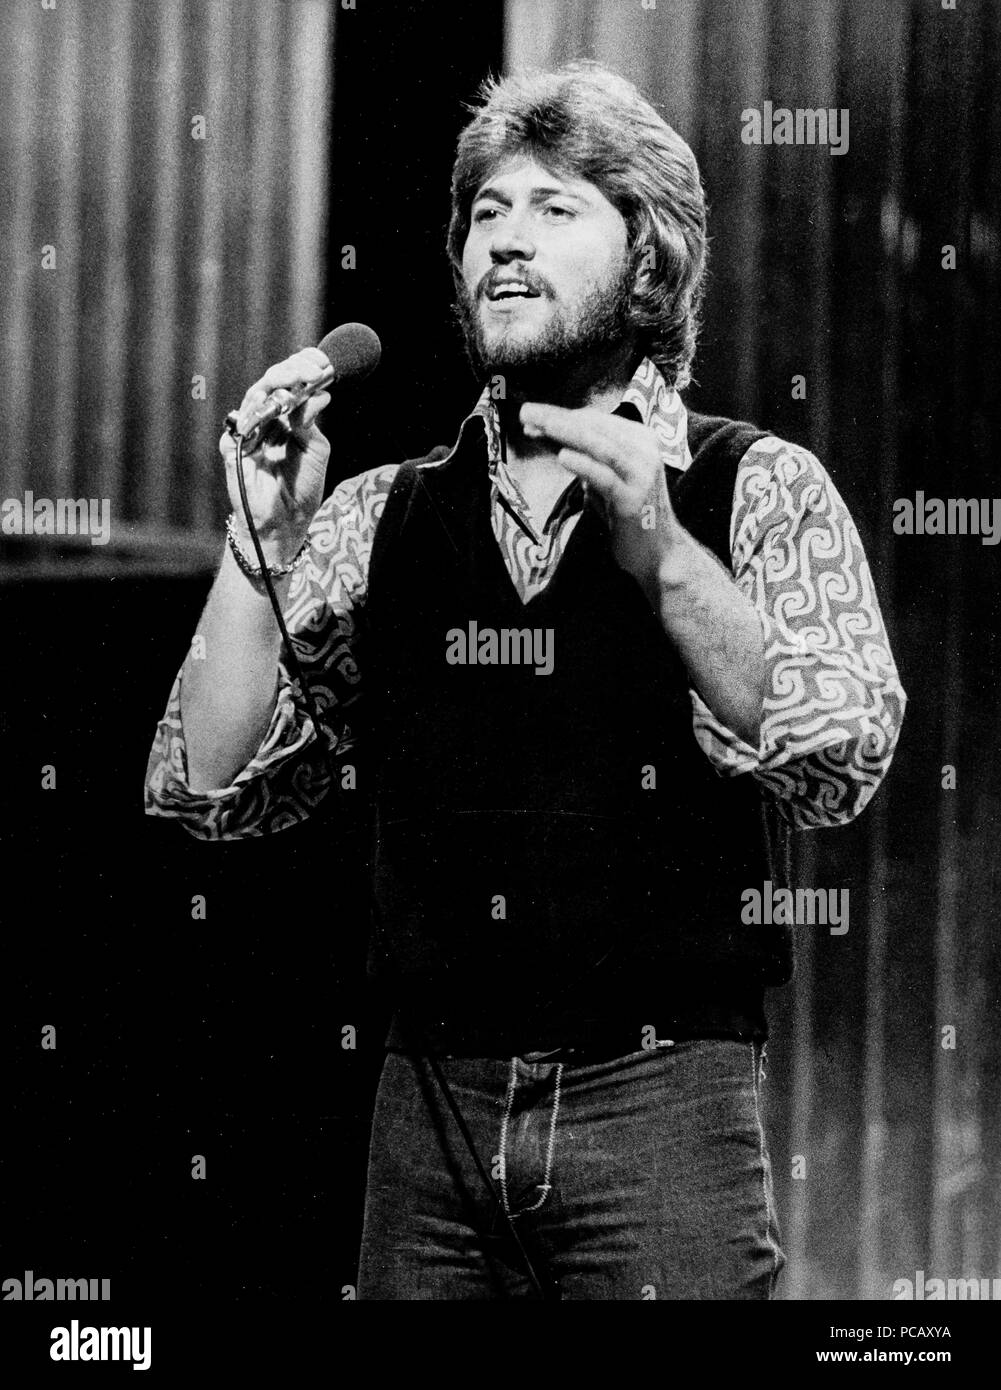 barry gibb, bee gees, top of the pop, bbc, 70s Stock Photo